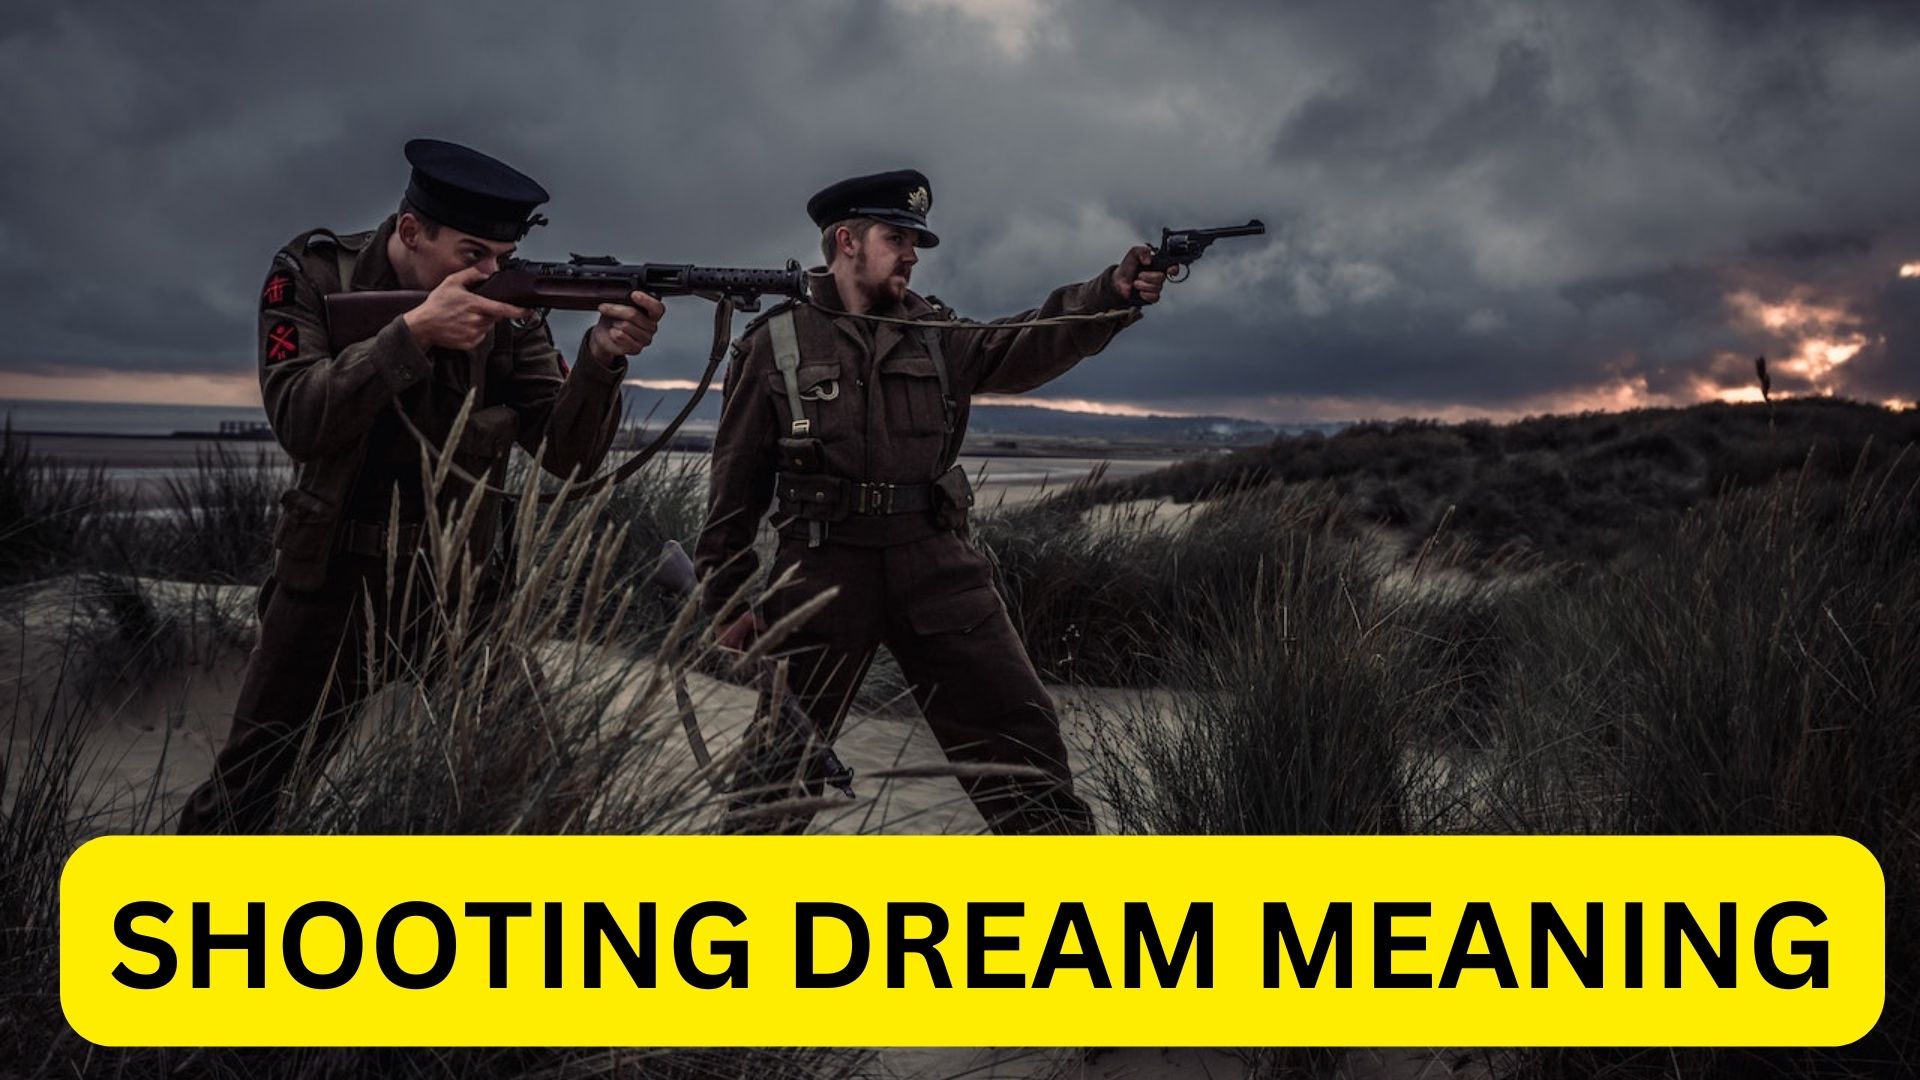 Shooting Dream Meaning - Some People Are Trying To Control You